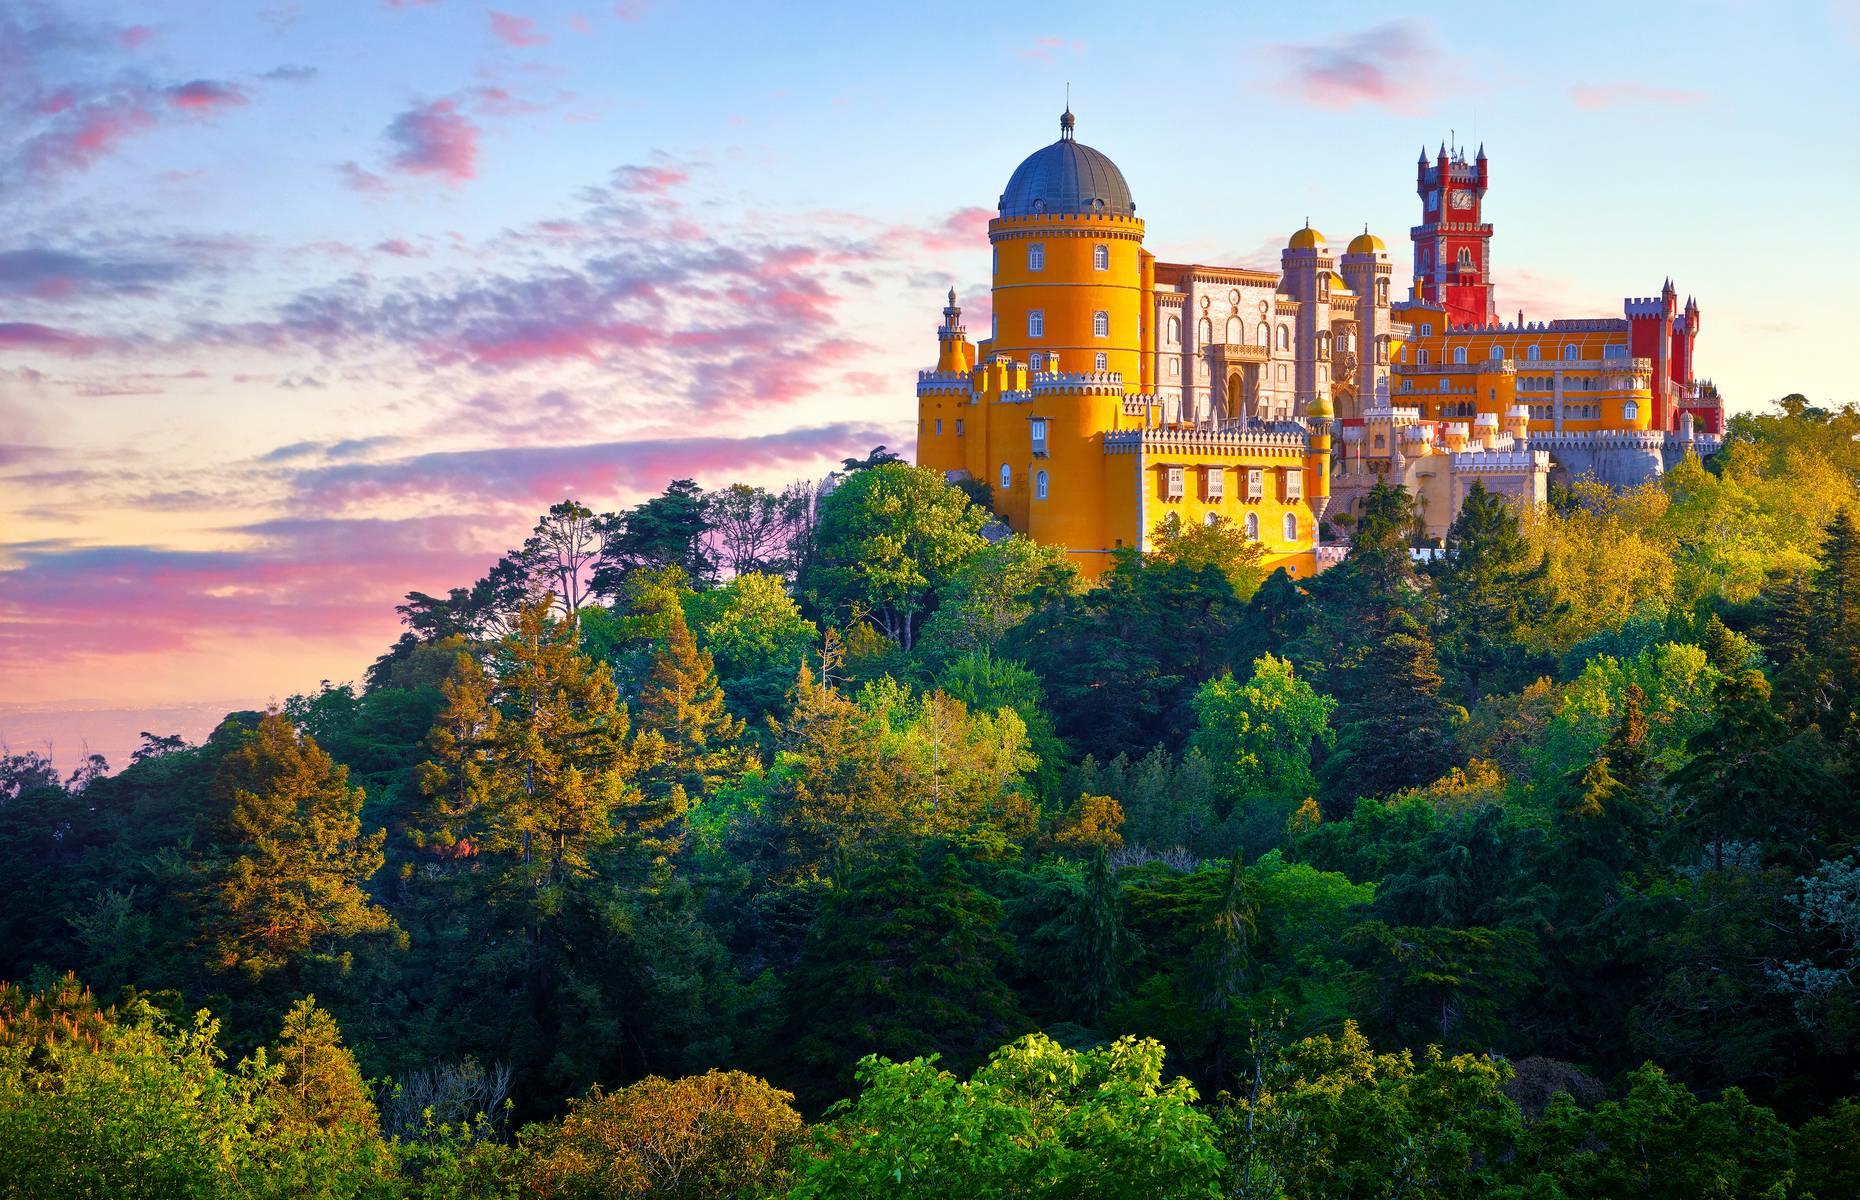 The jewel in Sintra’s crown is Pena Palace, the whimsical 19th-century castle which stands watch over the settlement. Located on the northern slope of the picturesque Sintra mountains, the town was formerly used as a royal summer residence. Today, it's best known for its historic palaces, 18th-century gardens and picturesque surroundings.